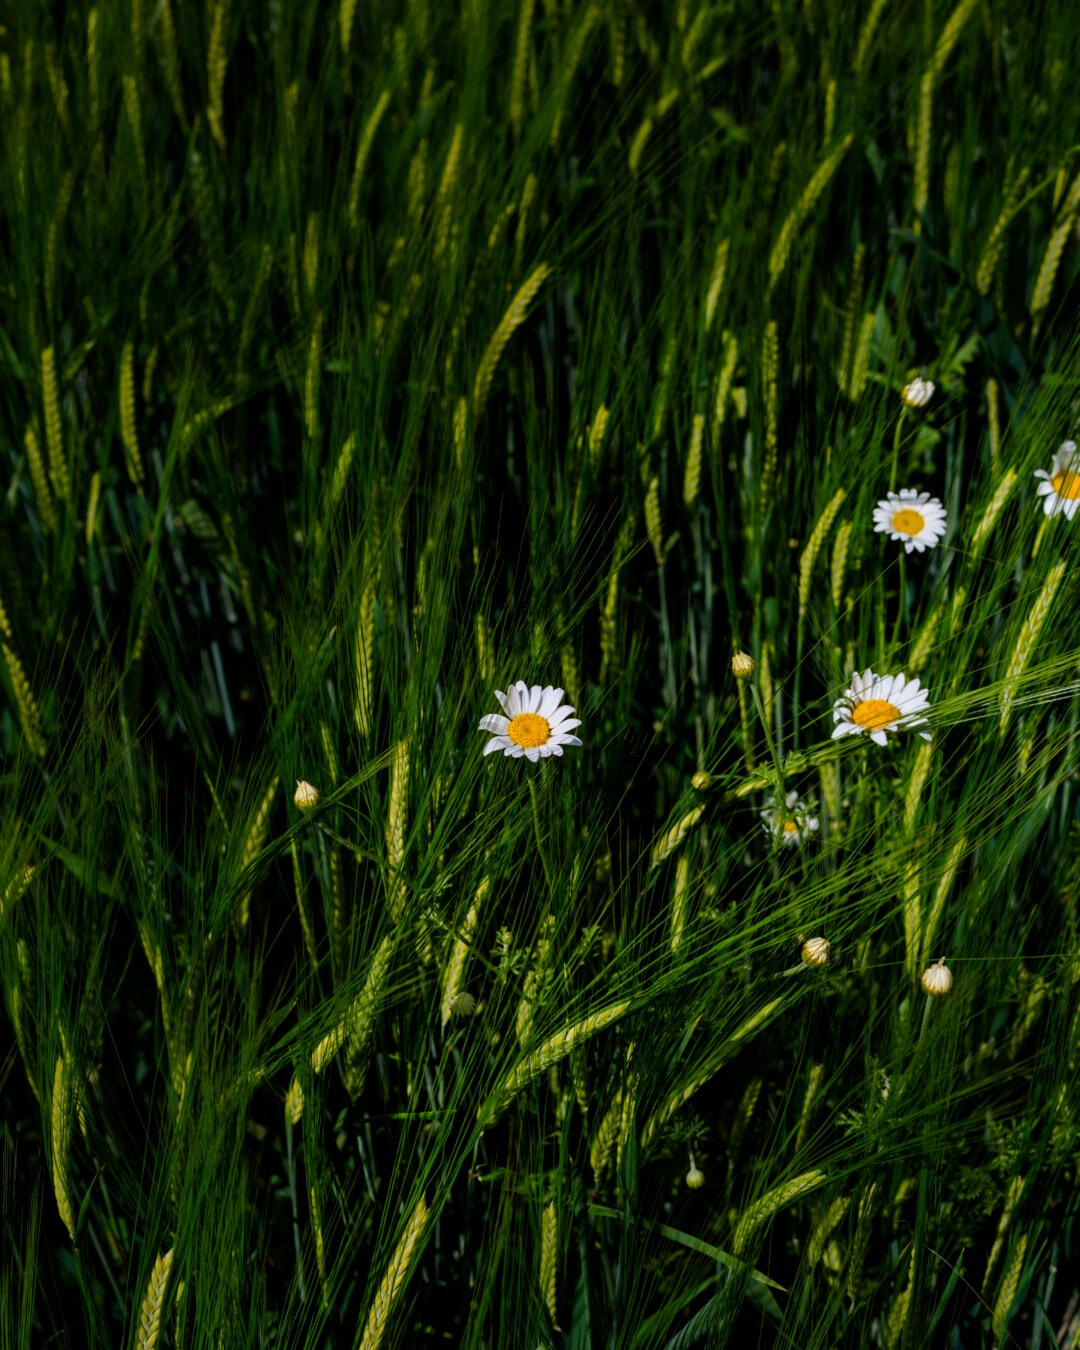 wheatfield, agriculture, chamomile, stem, green leaf, herb, summer, daisy, field, plant